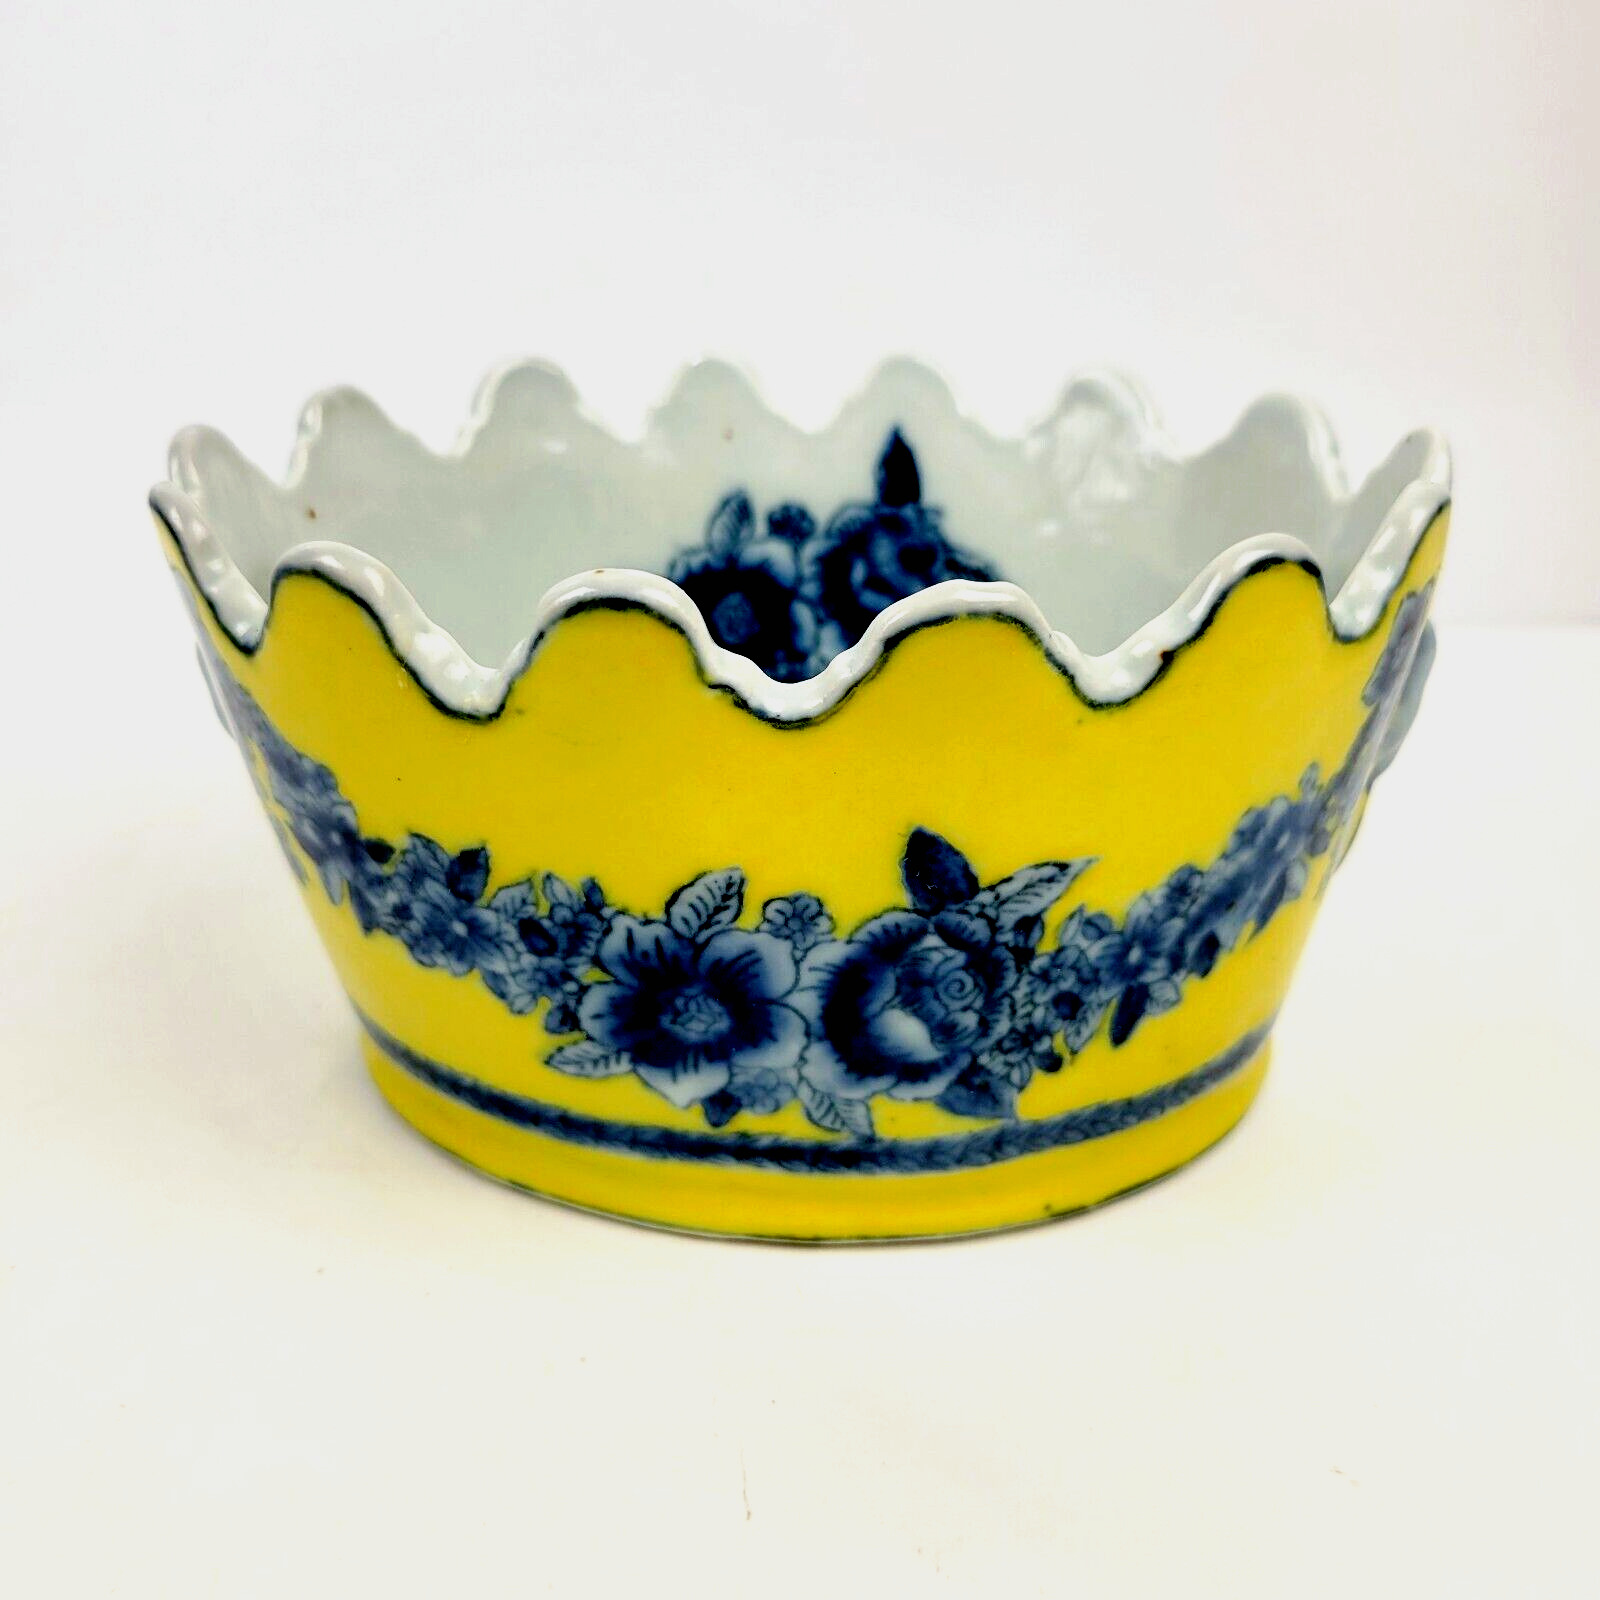 Vintage JUWC United Wilson Chinese Porcelain Monteith Bowl Yellow Blue Floral